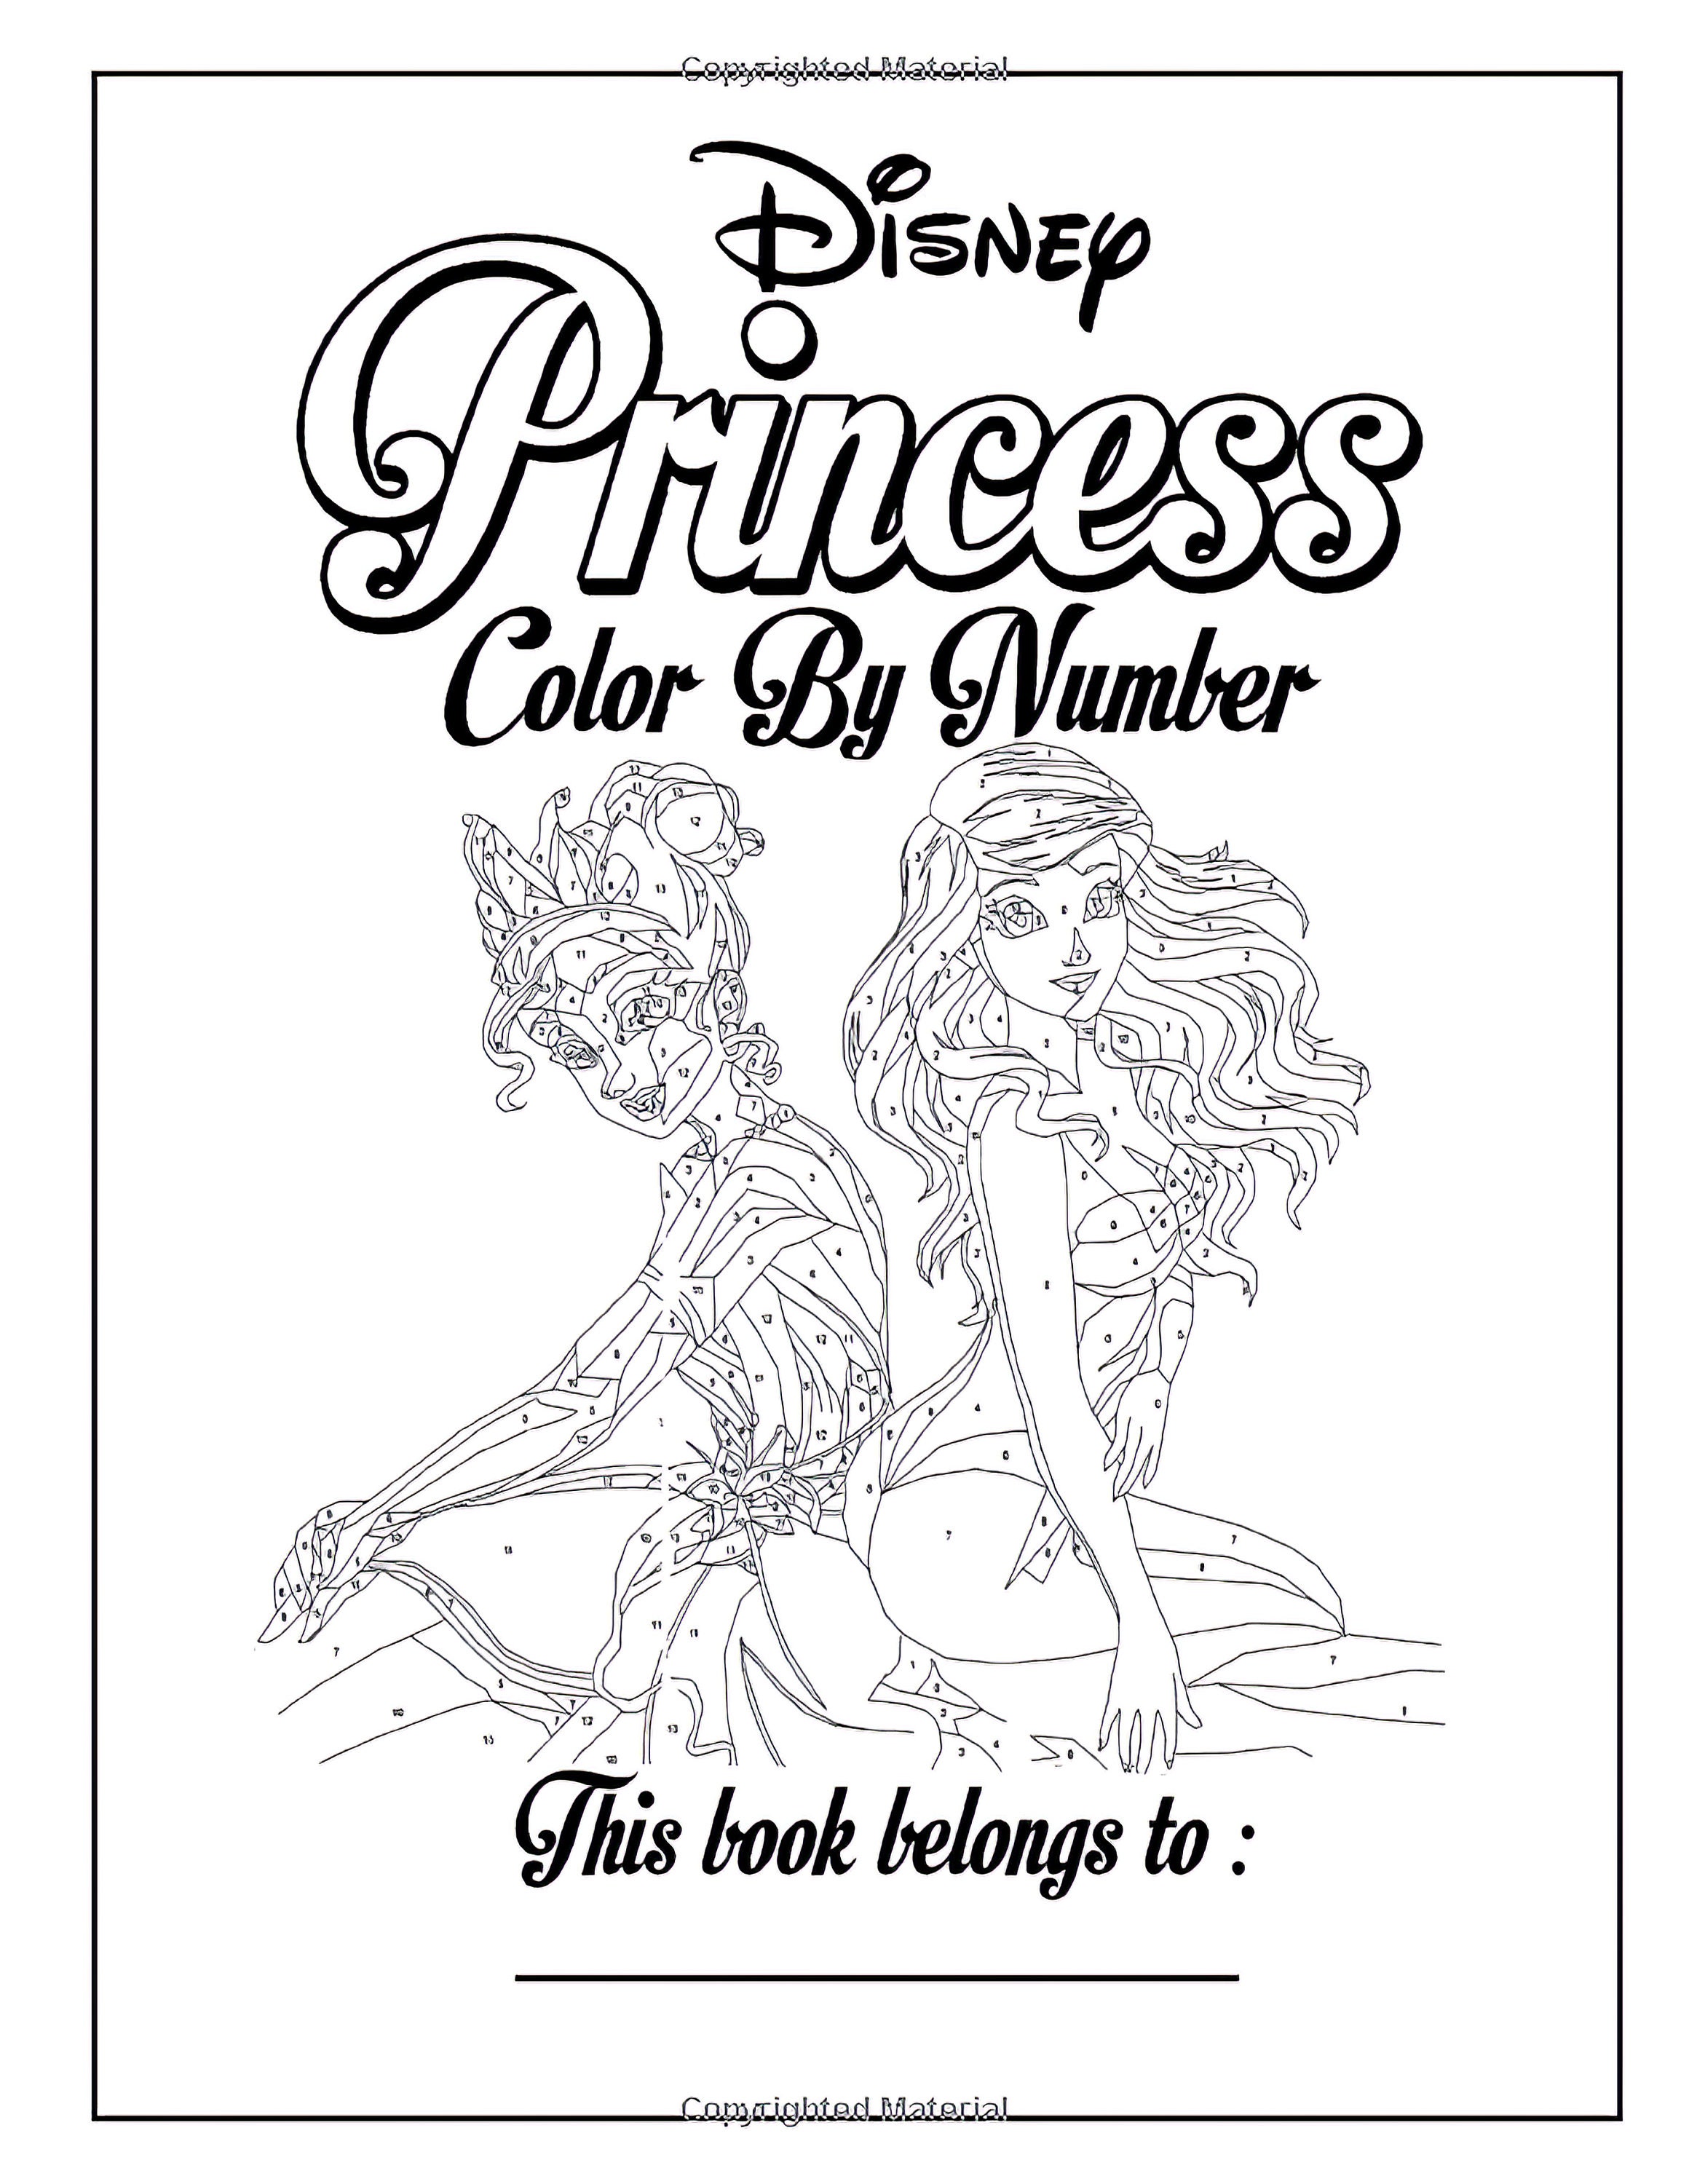 Princess Color By Number Great Coloring Book For Adults   Etsy.de